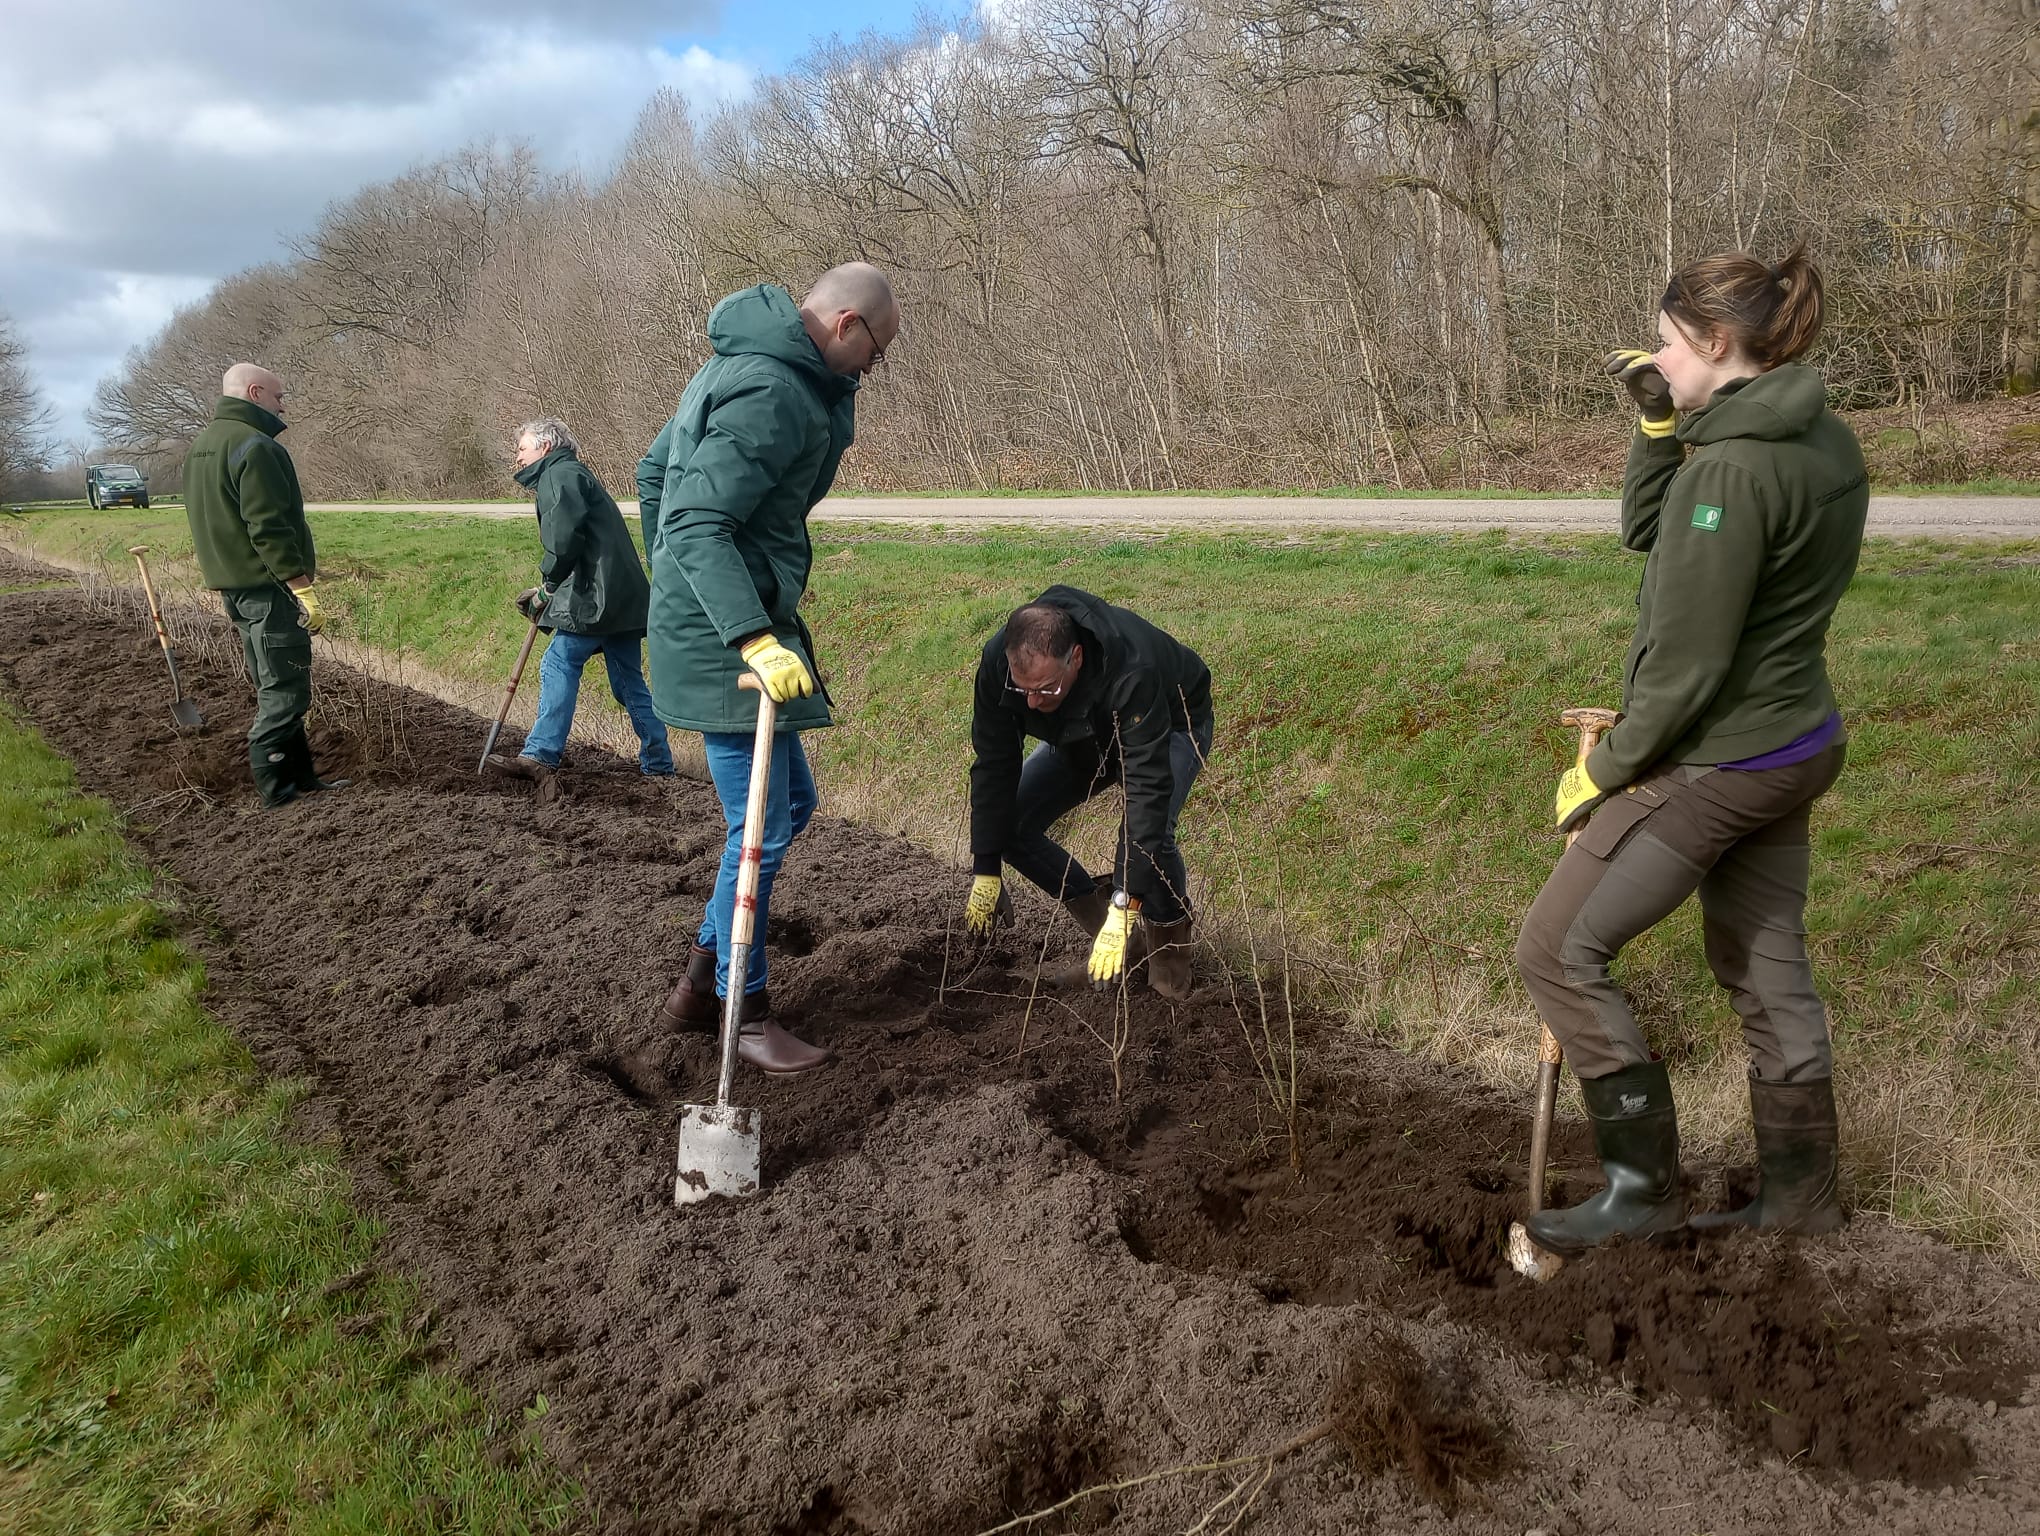 Ministry of Infrastructure and Water Management, the Province of Fryslân, and the Municipality of Leeuwarden planting 3000 trees in Beekdal De Linde.